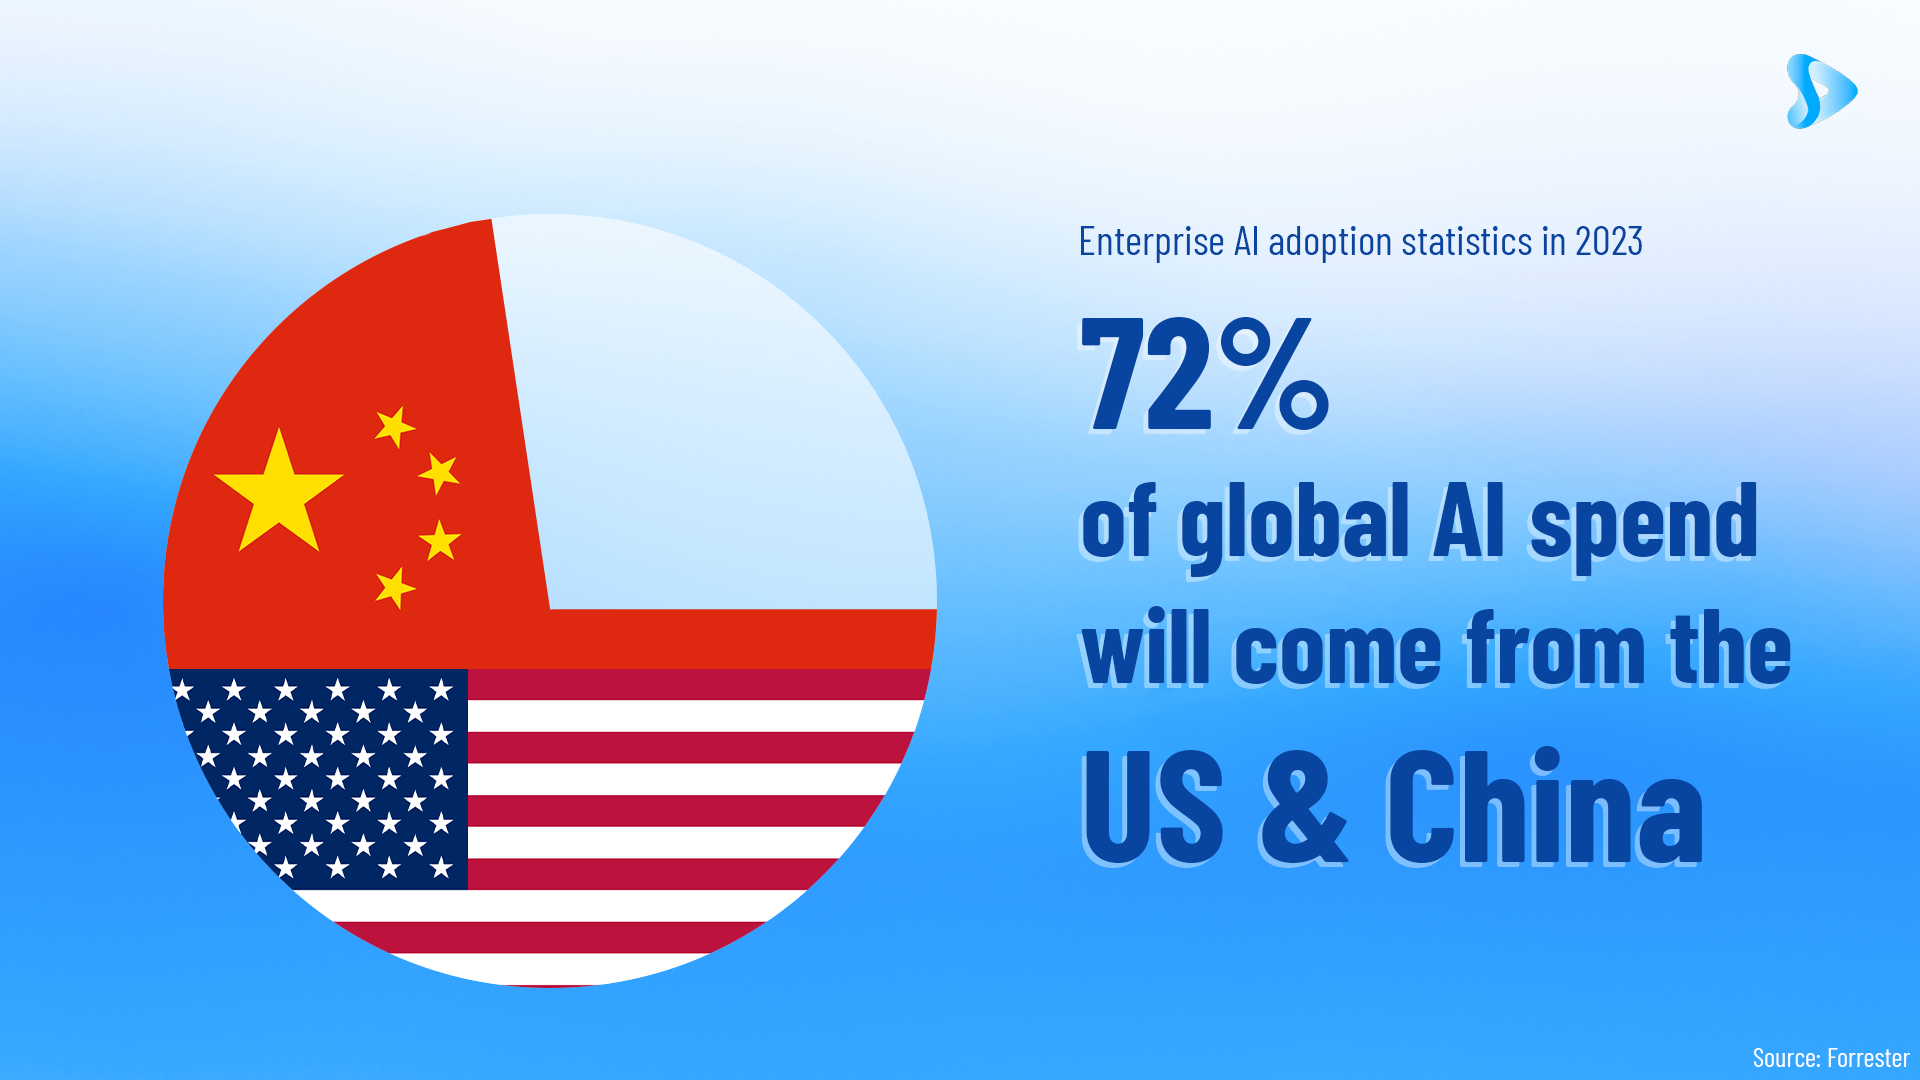  Enterprise AI spends in 2023 - US and China